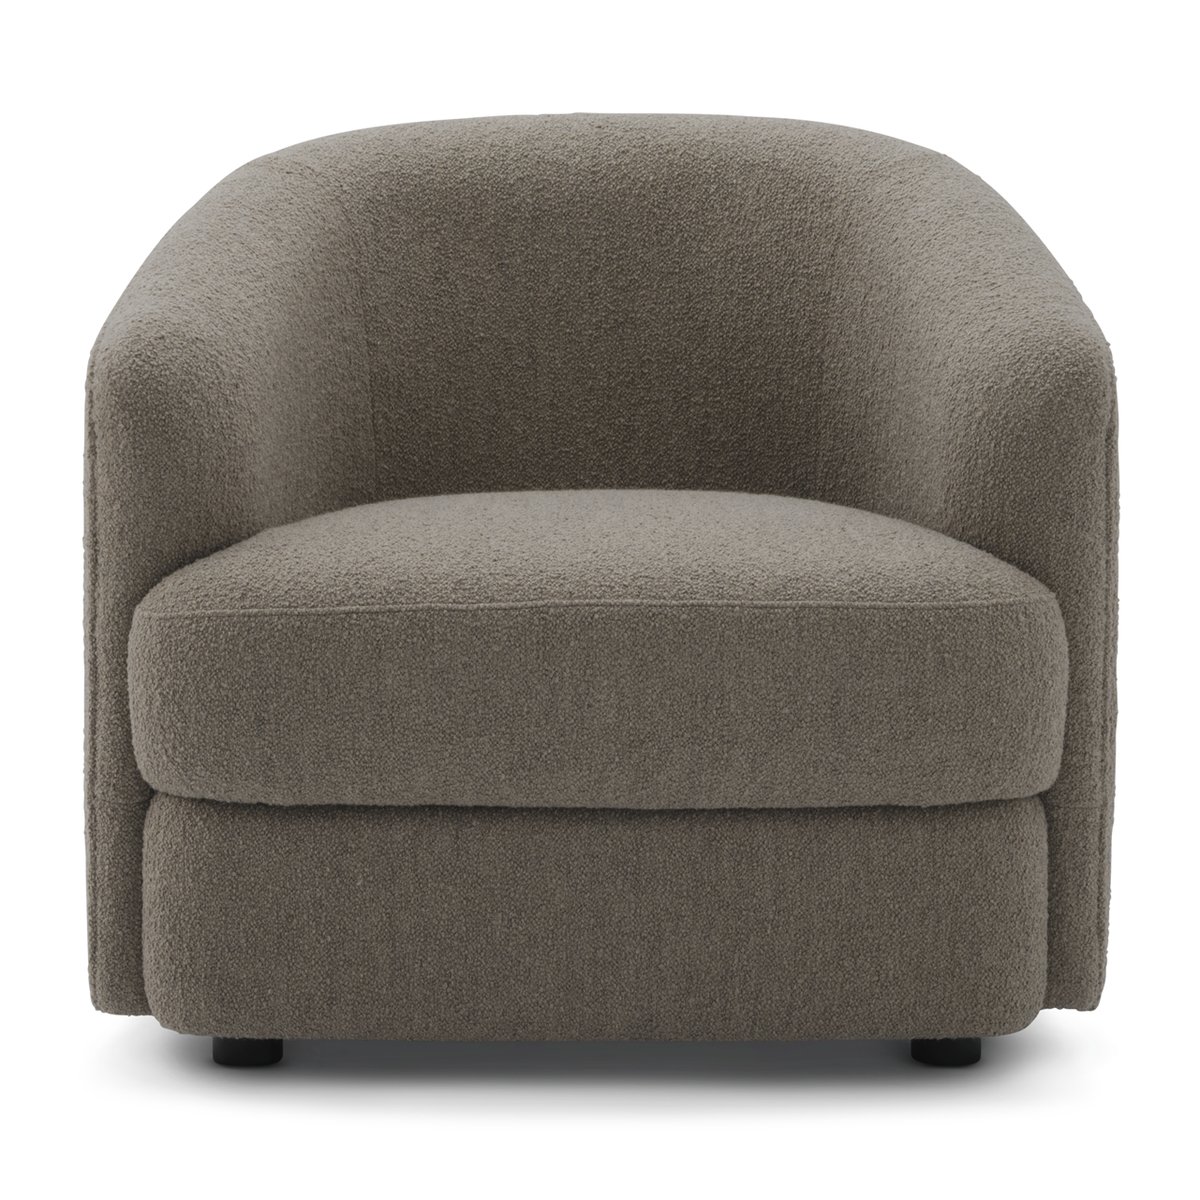 New Works Covent fauteuil Dark Taupe